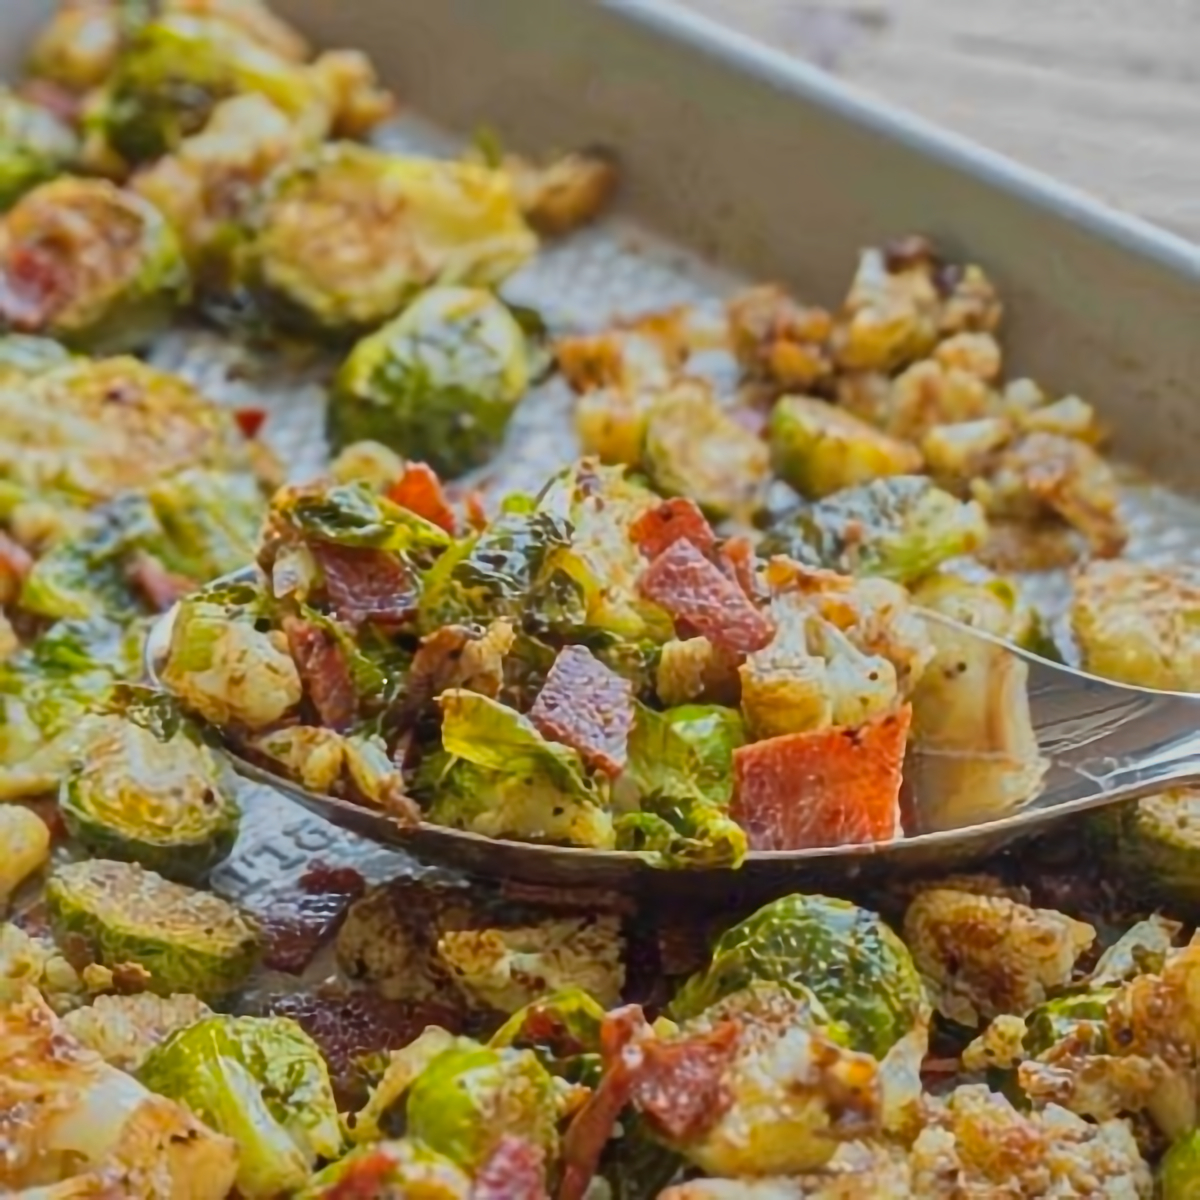 31. Roasted Brussel Sprouts with Bacon and Cauliflower